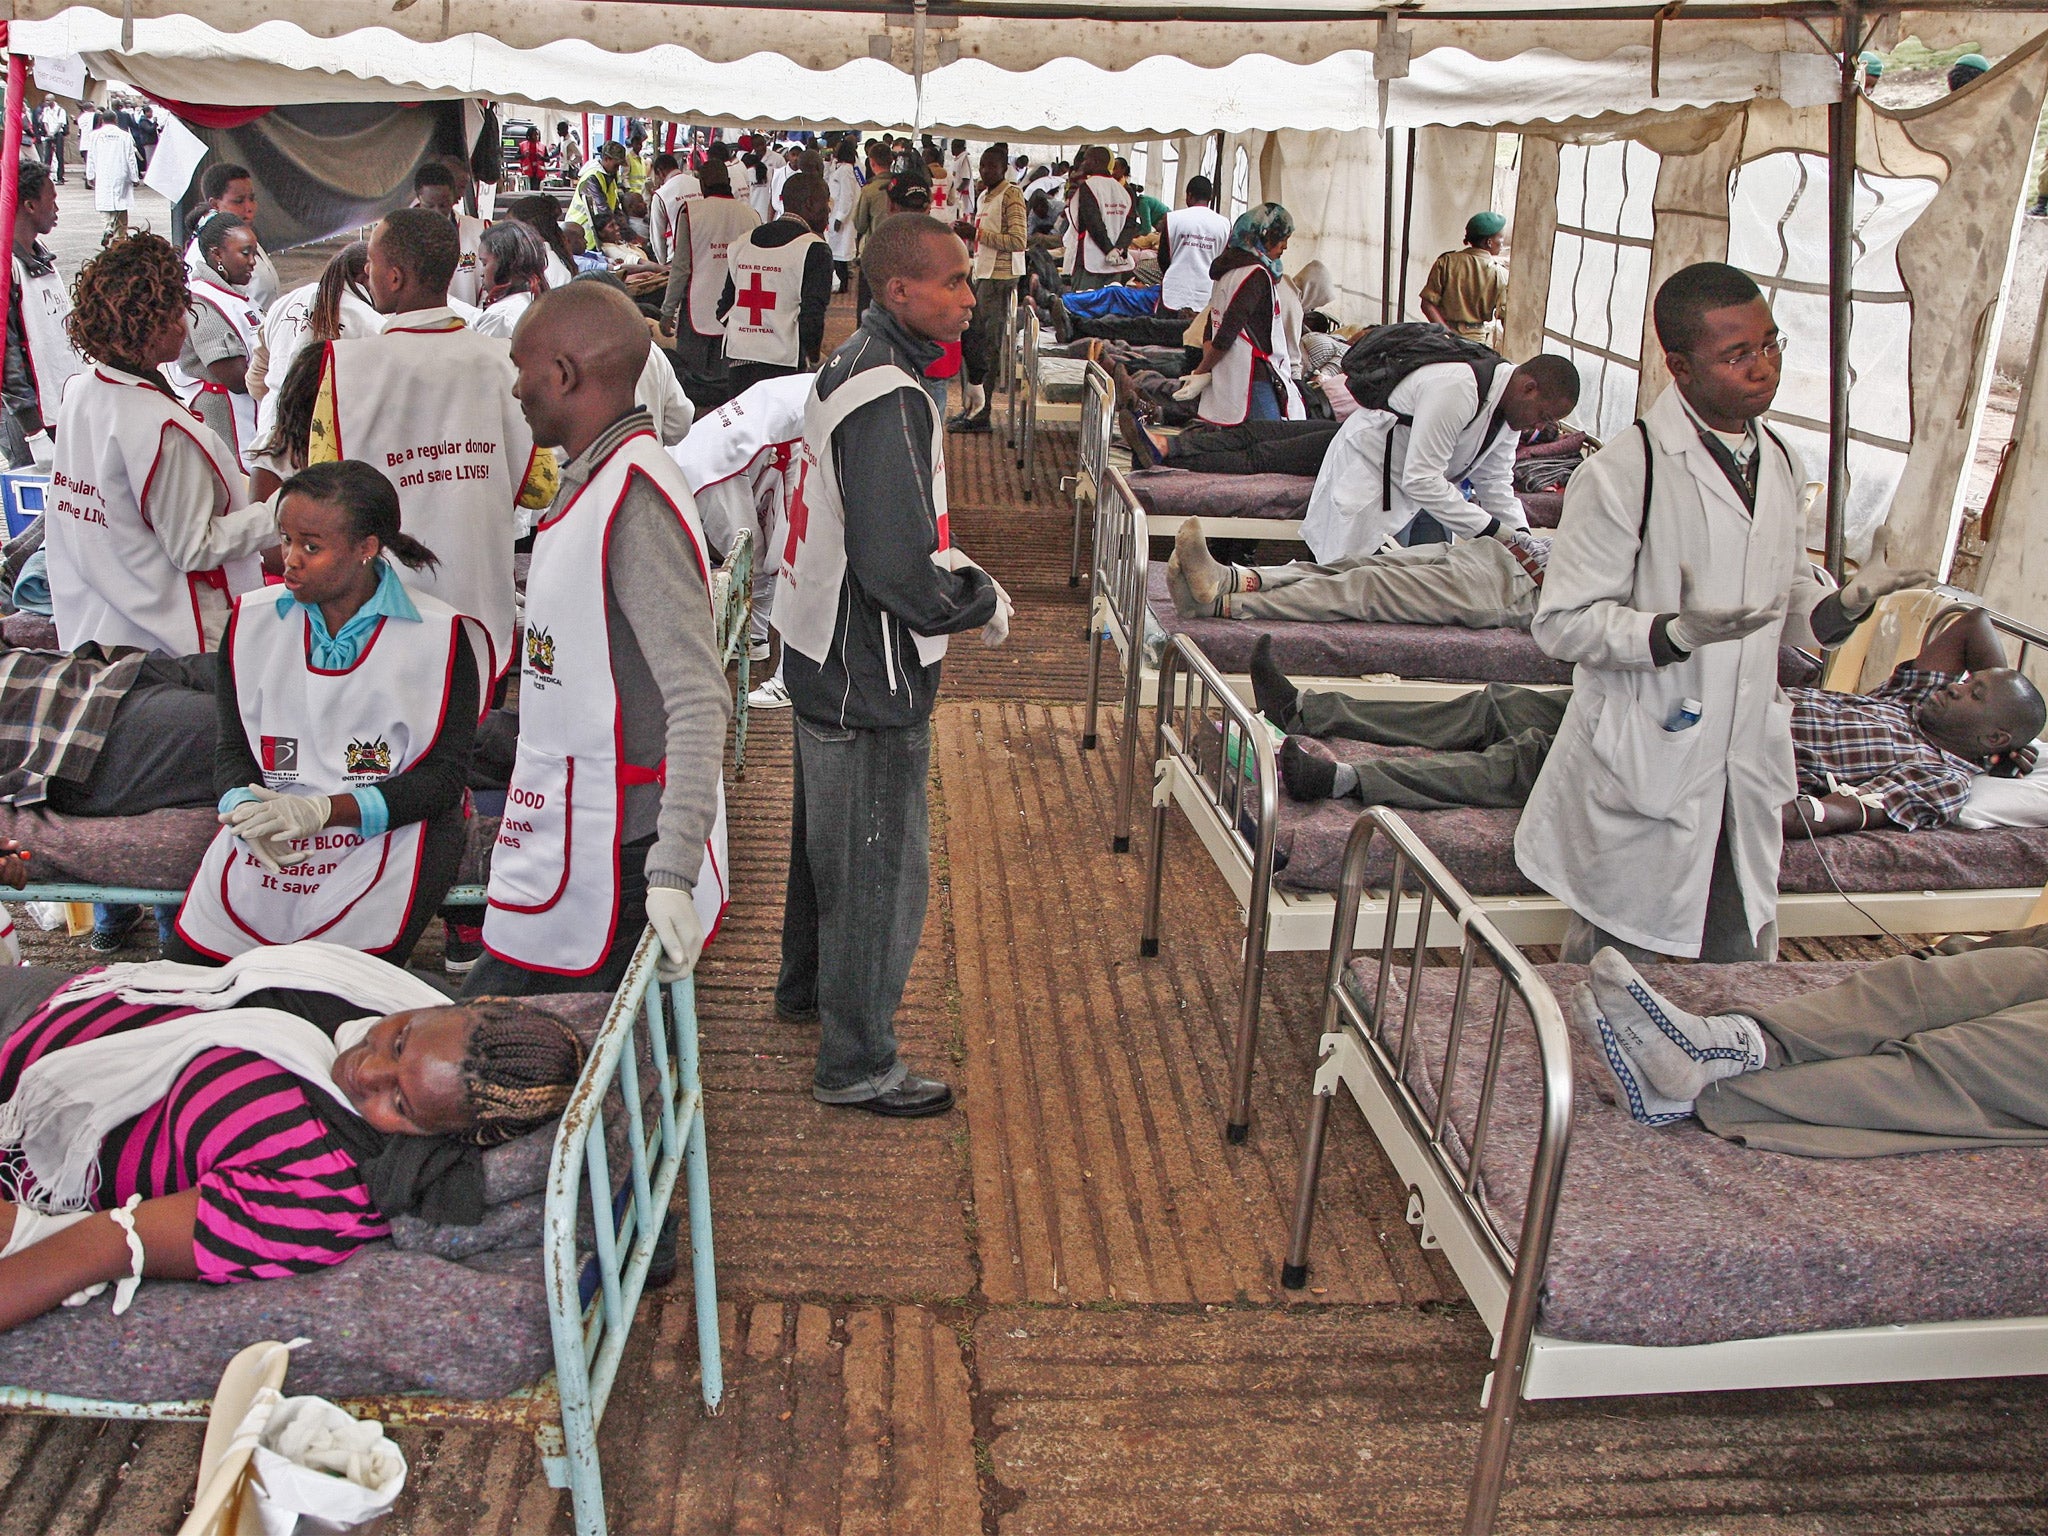 Nairobi citizens donate blood for victims of the Westgate mall terrorist attack